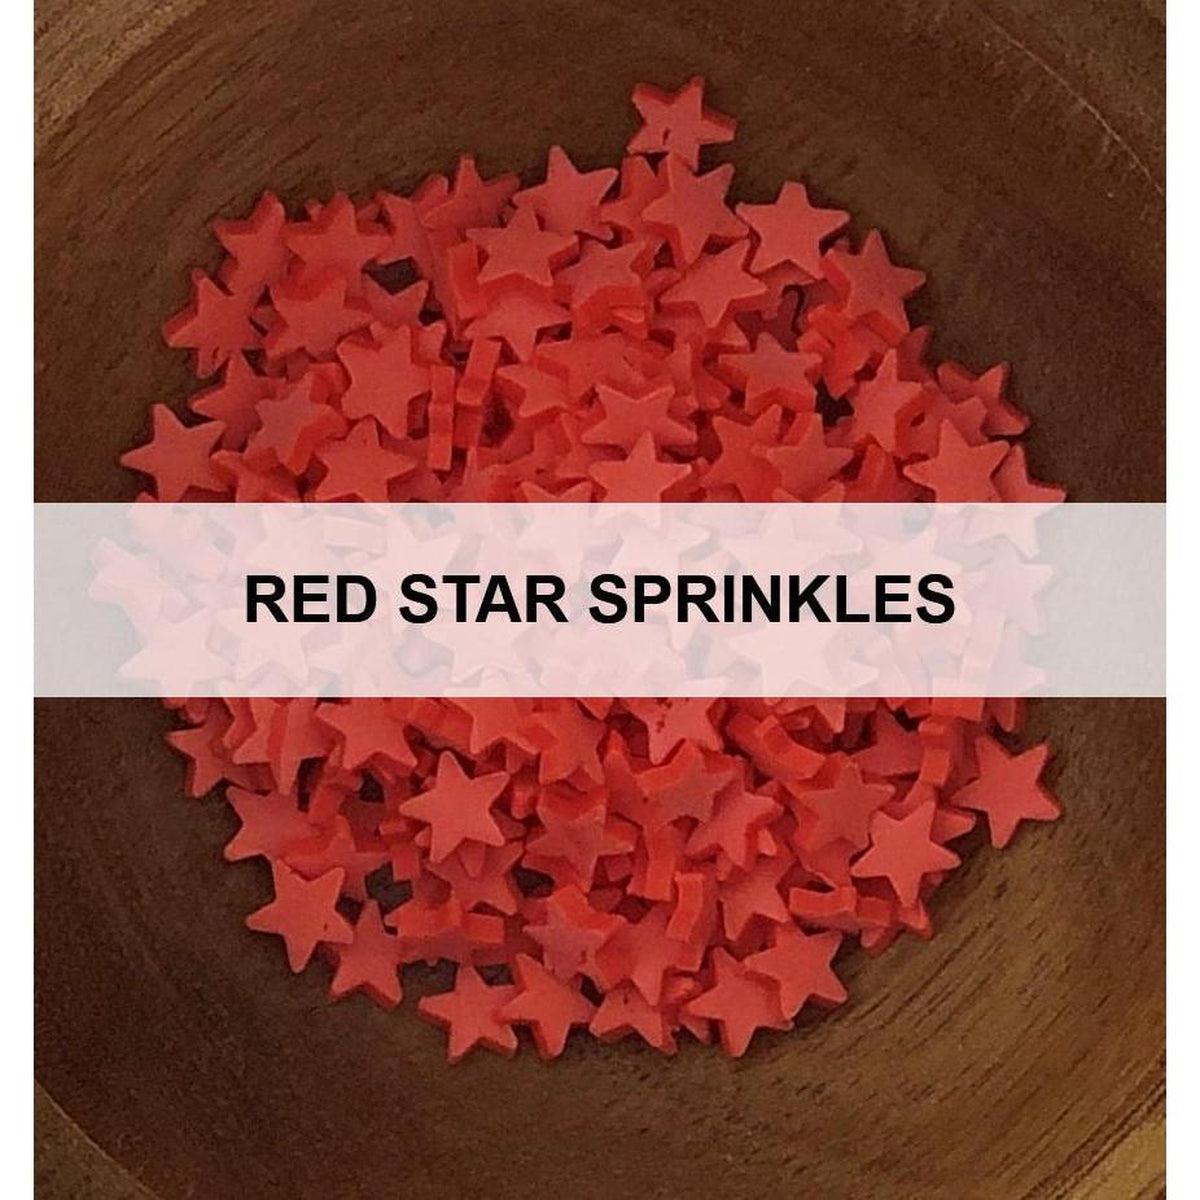 Red Star Sprinkles by Kat Scrappiness - Kat Scrappiness